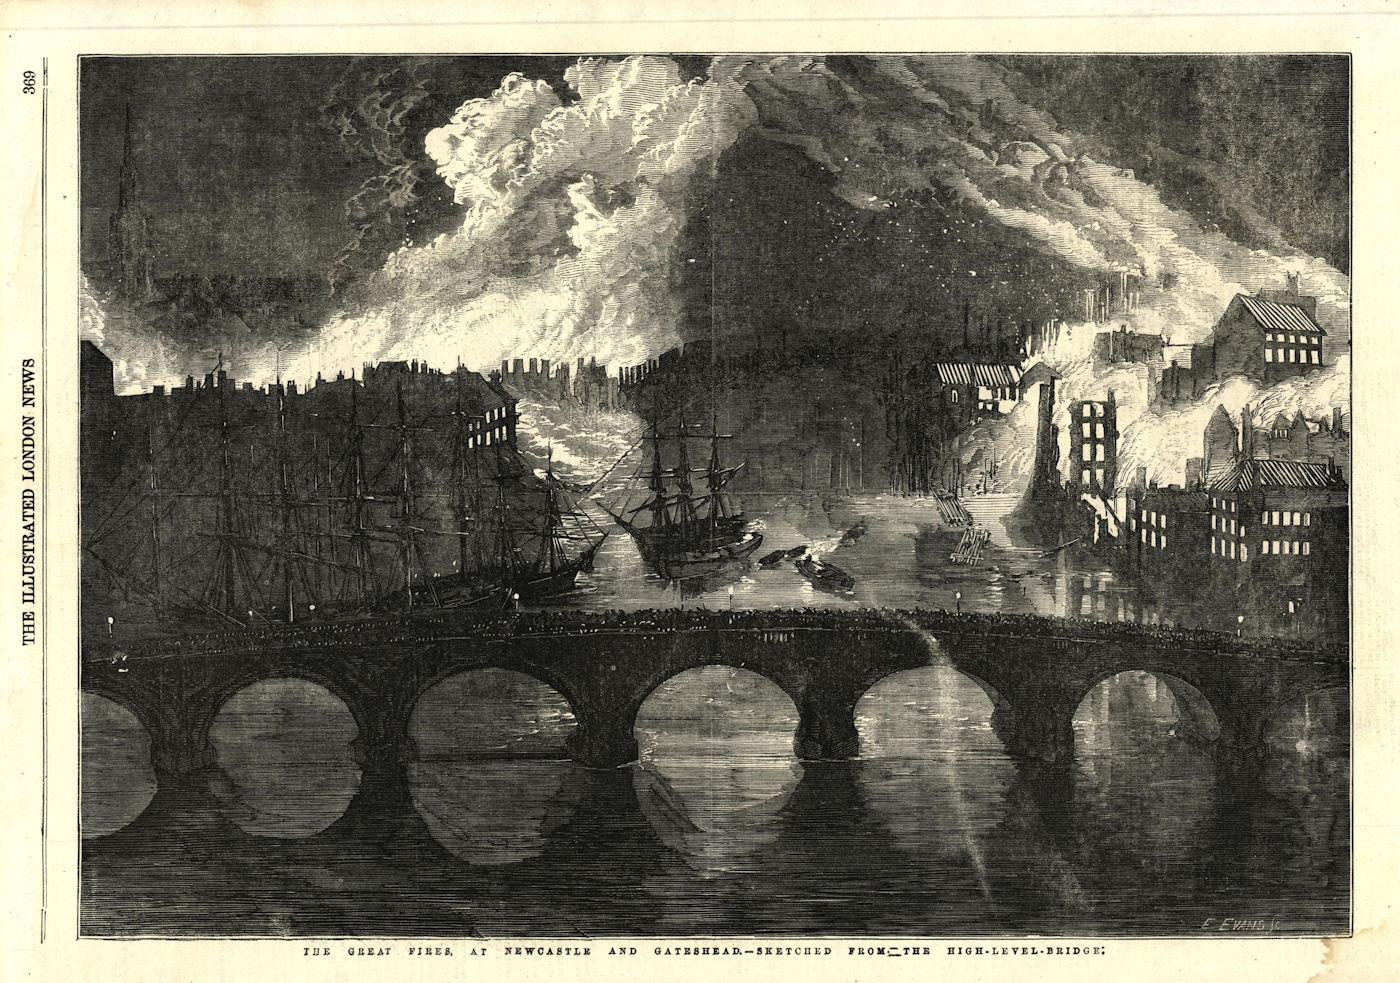 Associate Product The great fires at Newcastle & Gateshead from the High Level Bridge 1854 print